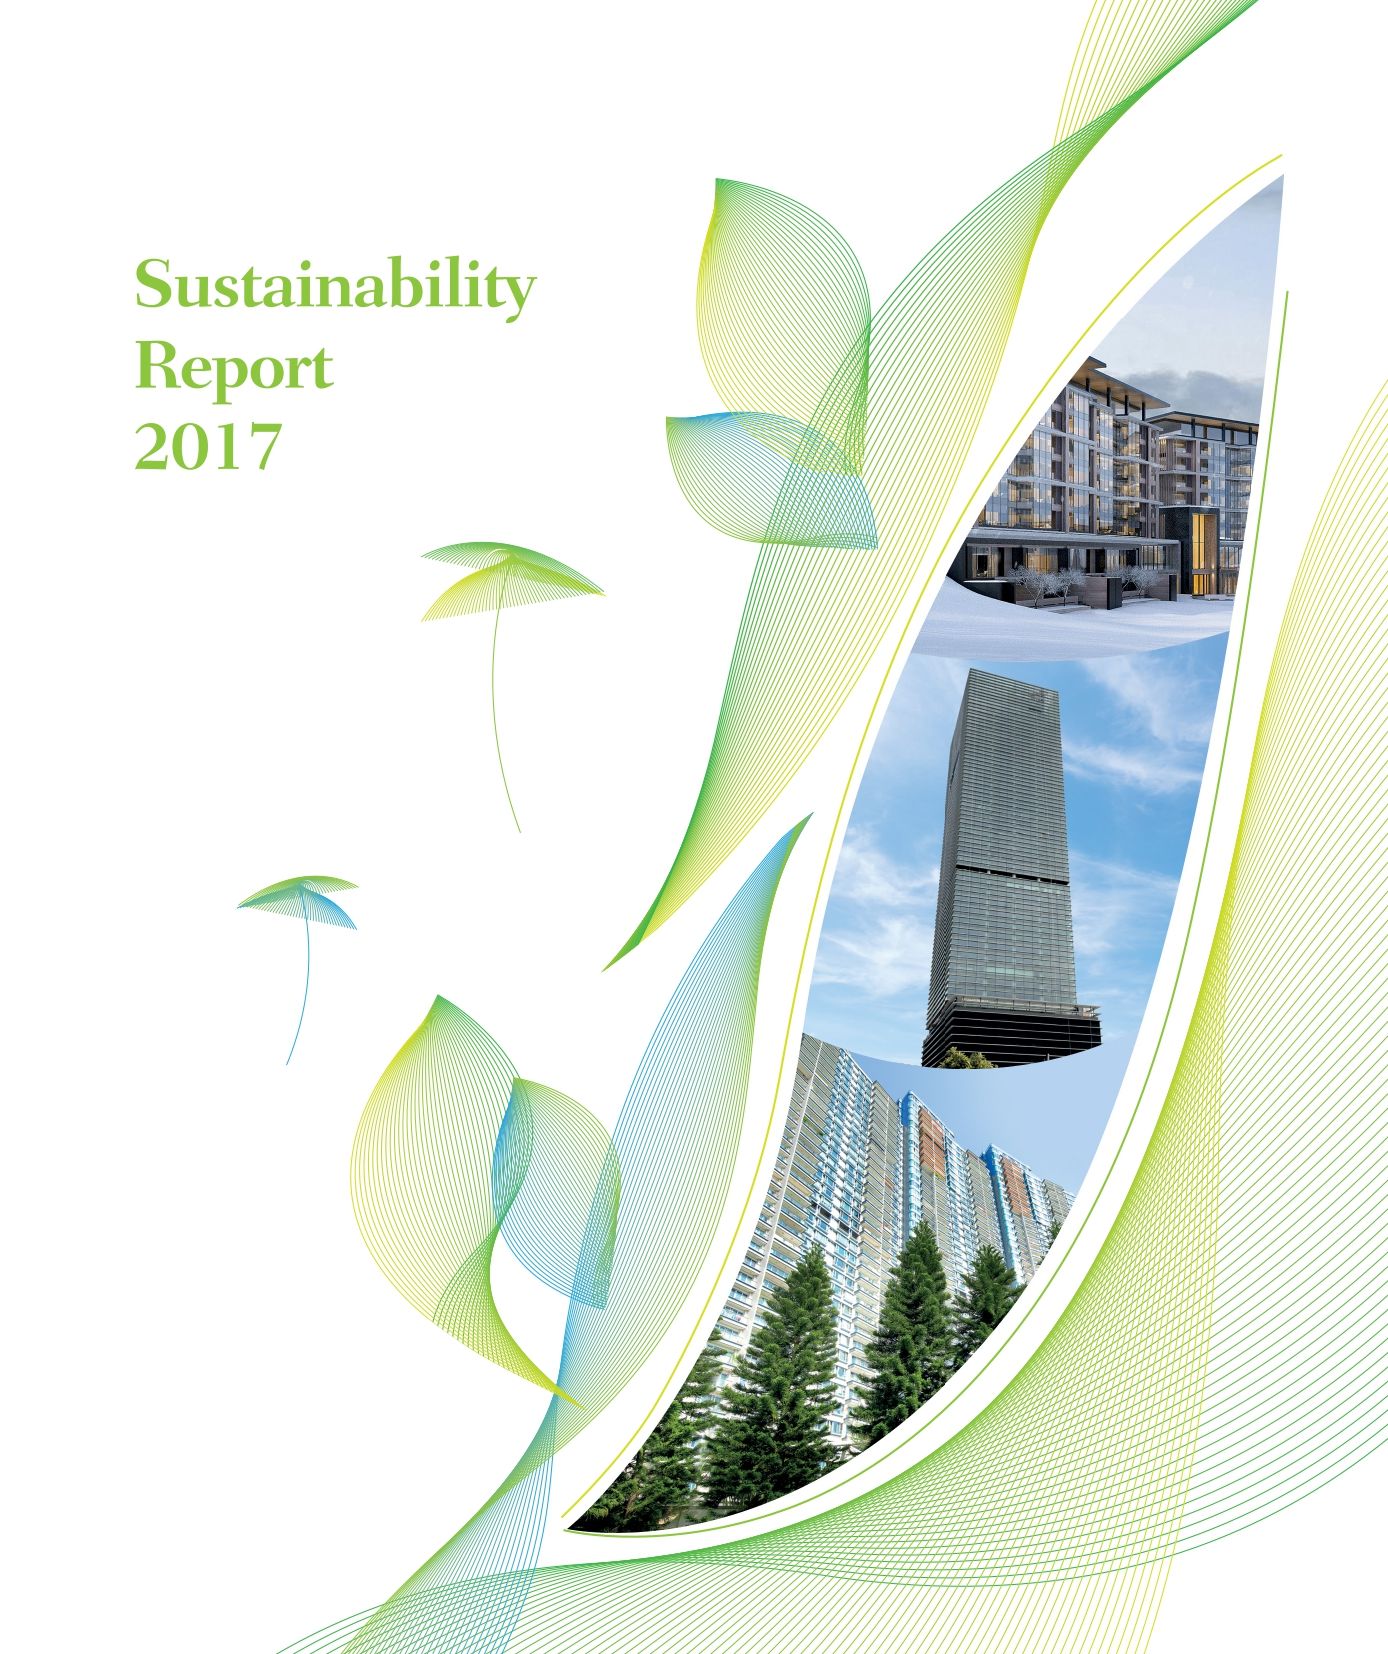 This is the cover of Sustainability Report 2017